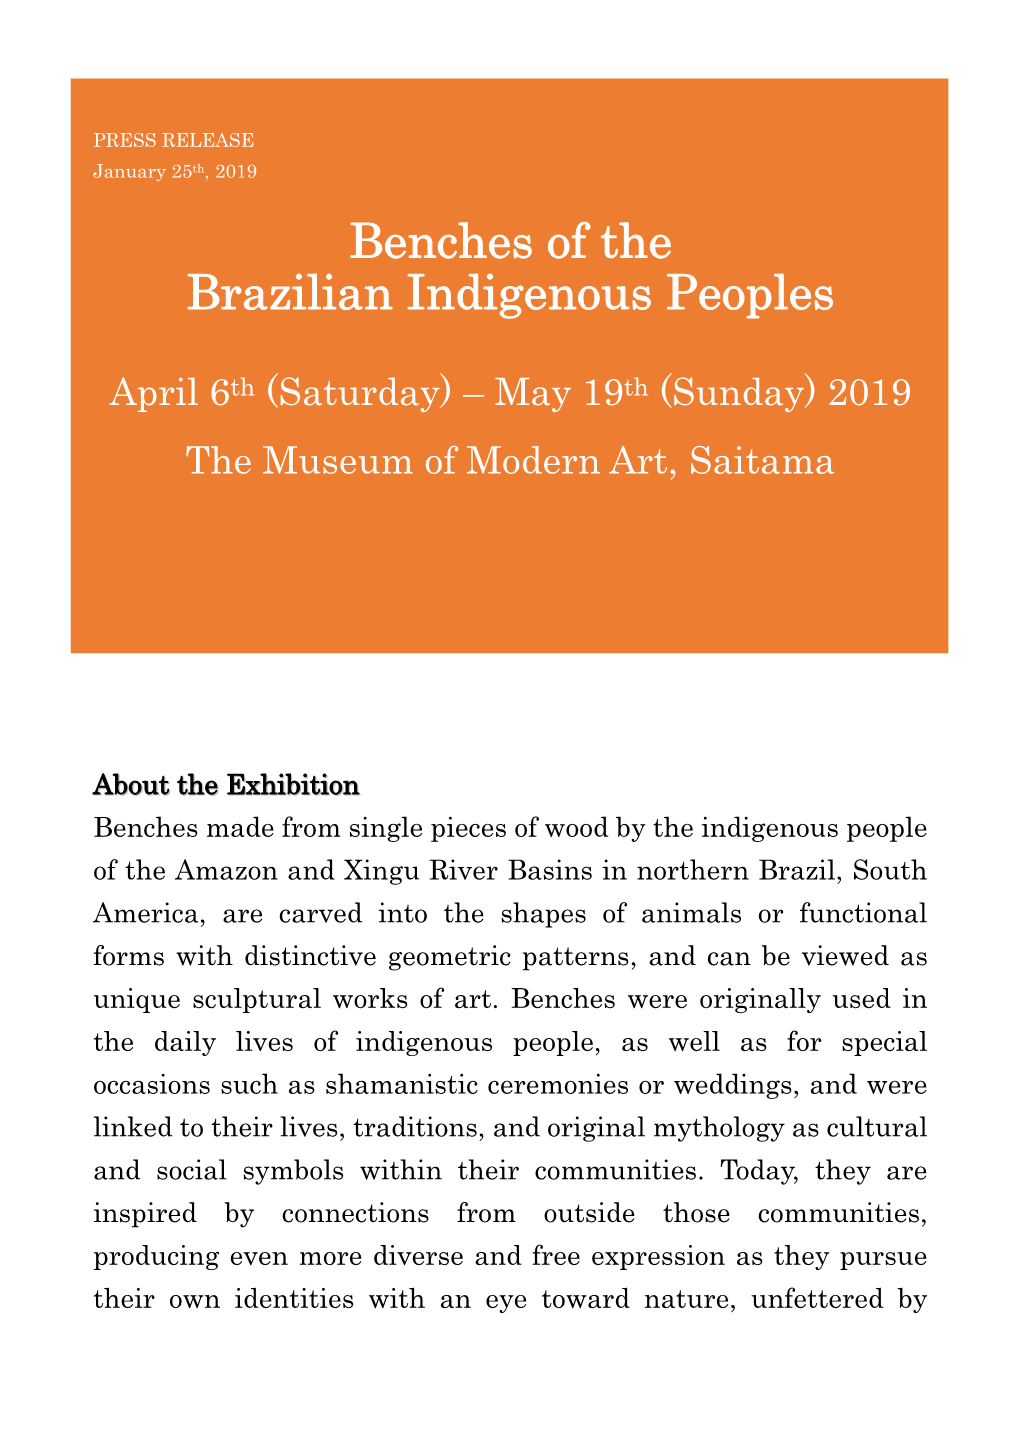 Benches of the Brazilian Indigenous Peoples